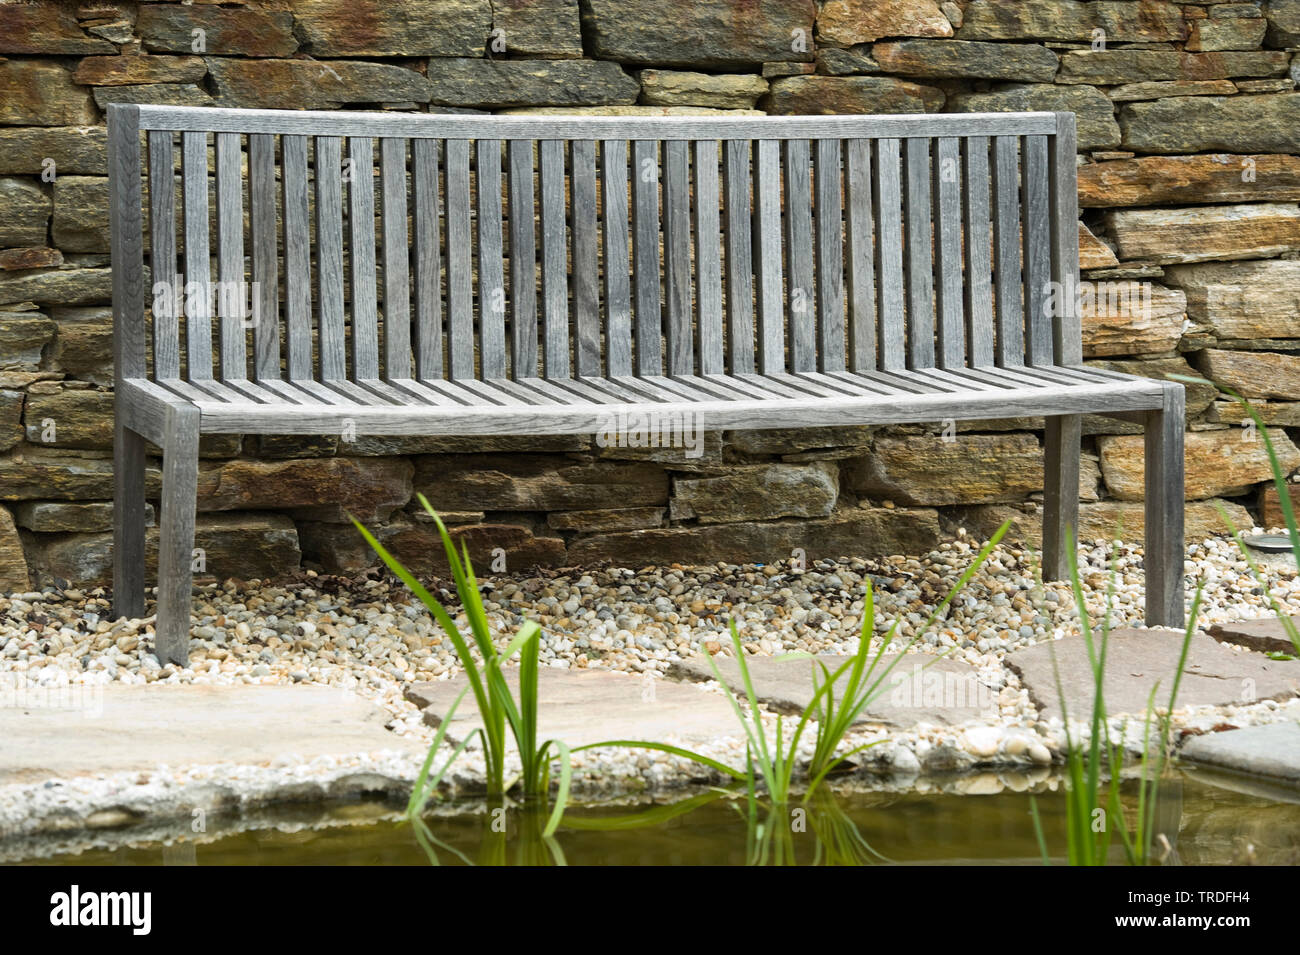 Empty wooden bench in front of a stone wall Stock Photo